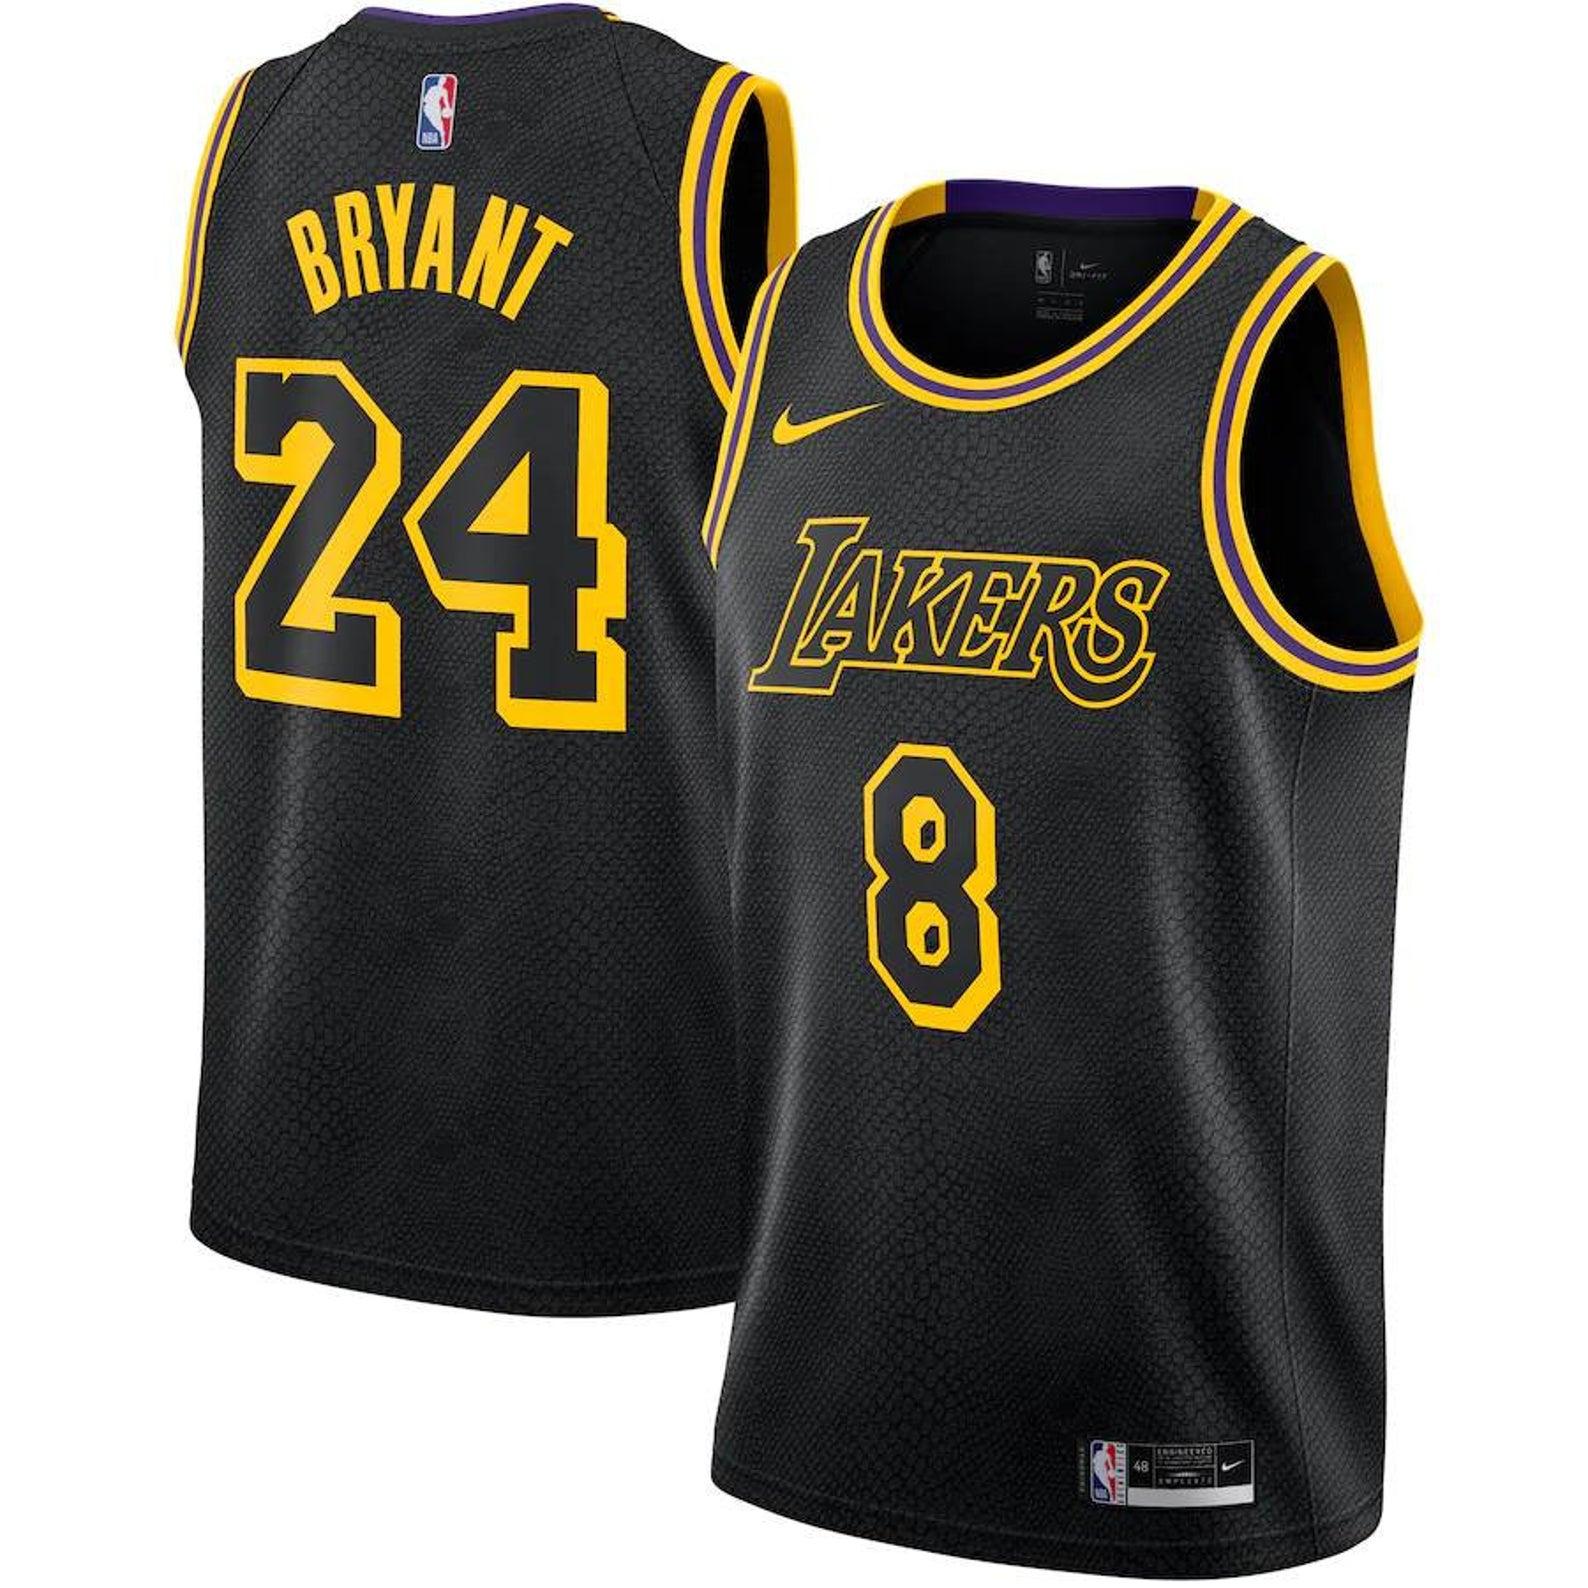 Men's Basketball Jersey, Kobe #8+24 Black Mamba Memorial Limited Edition  Special Edition Jersey-X-Large : : Sports, Fitness & Outdoors